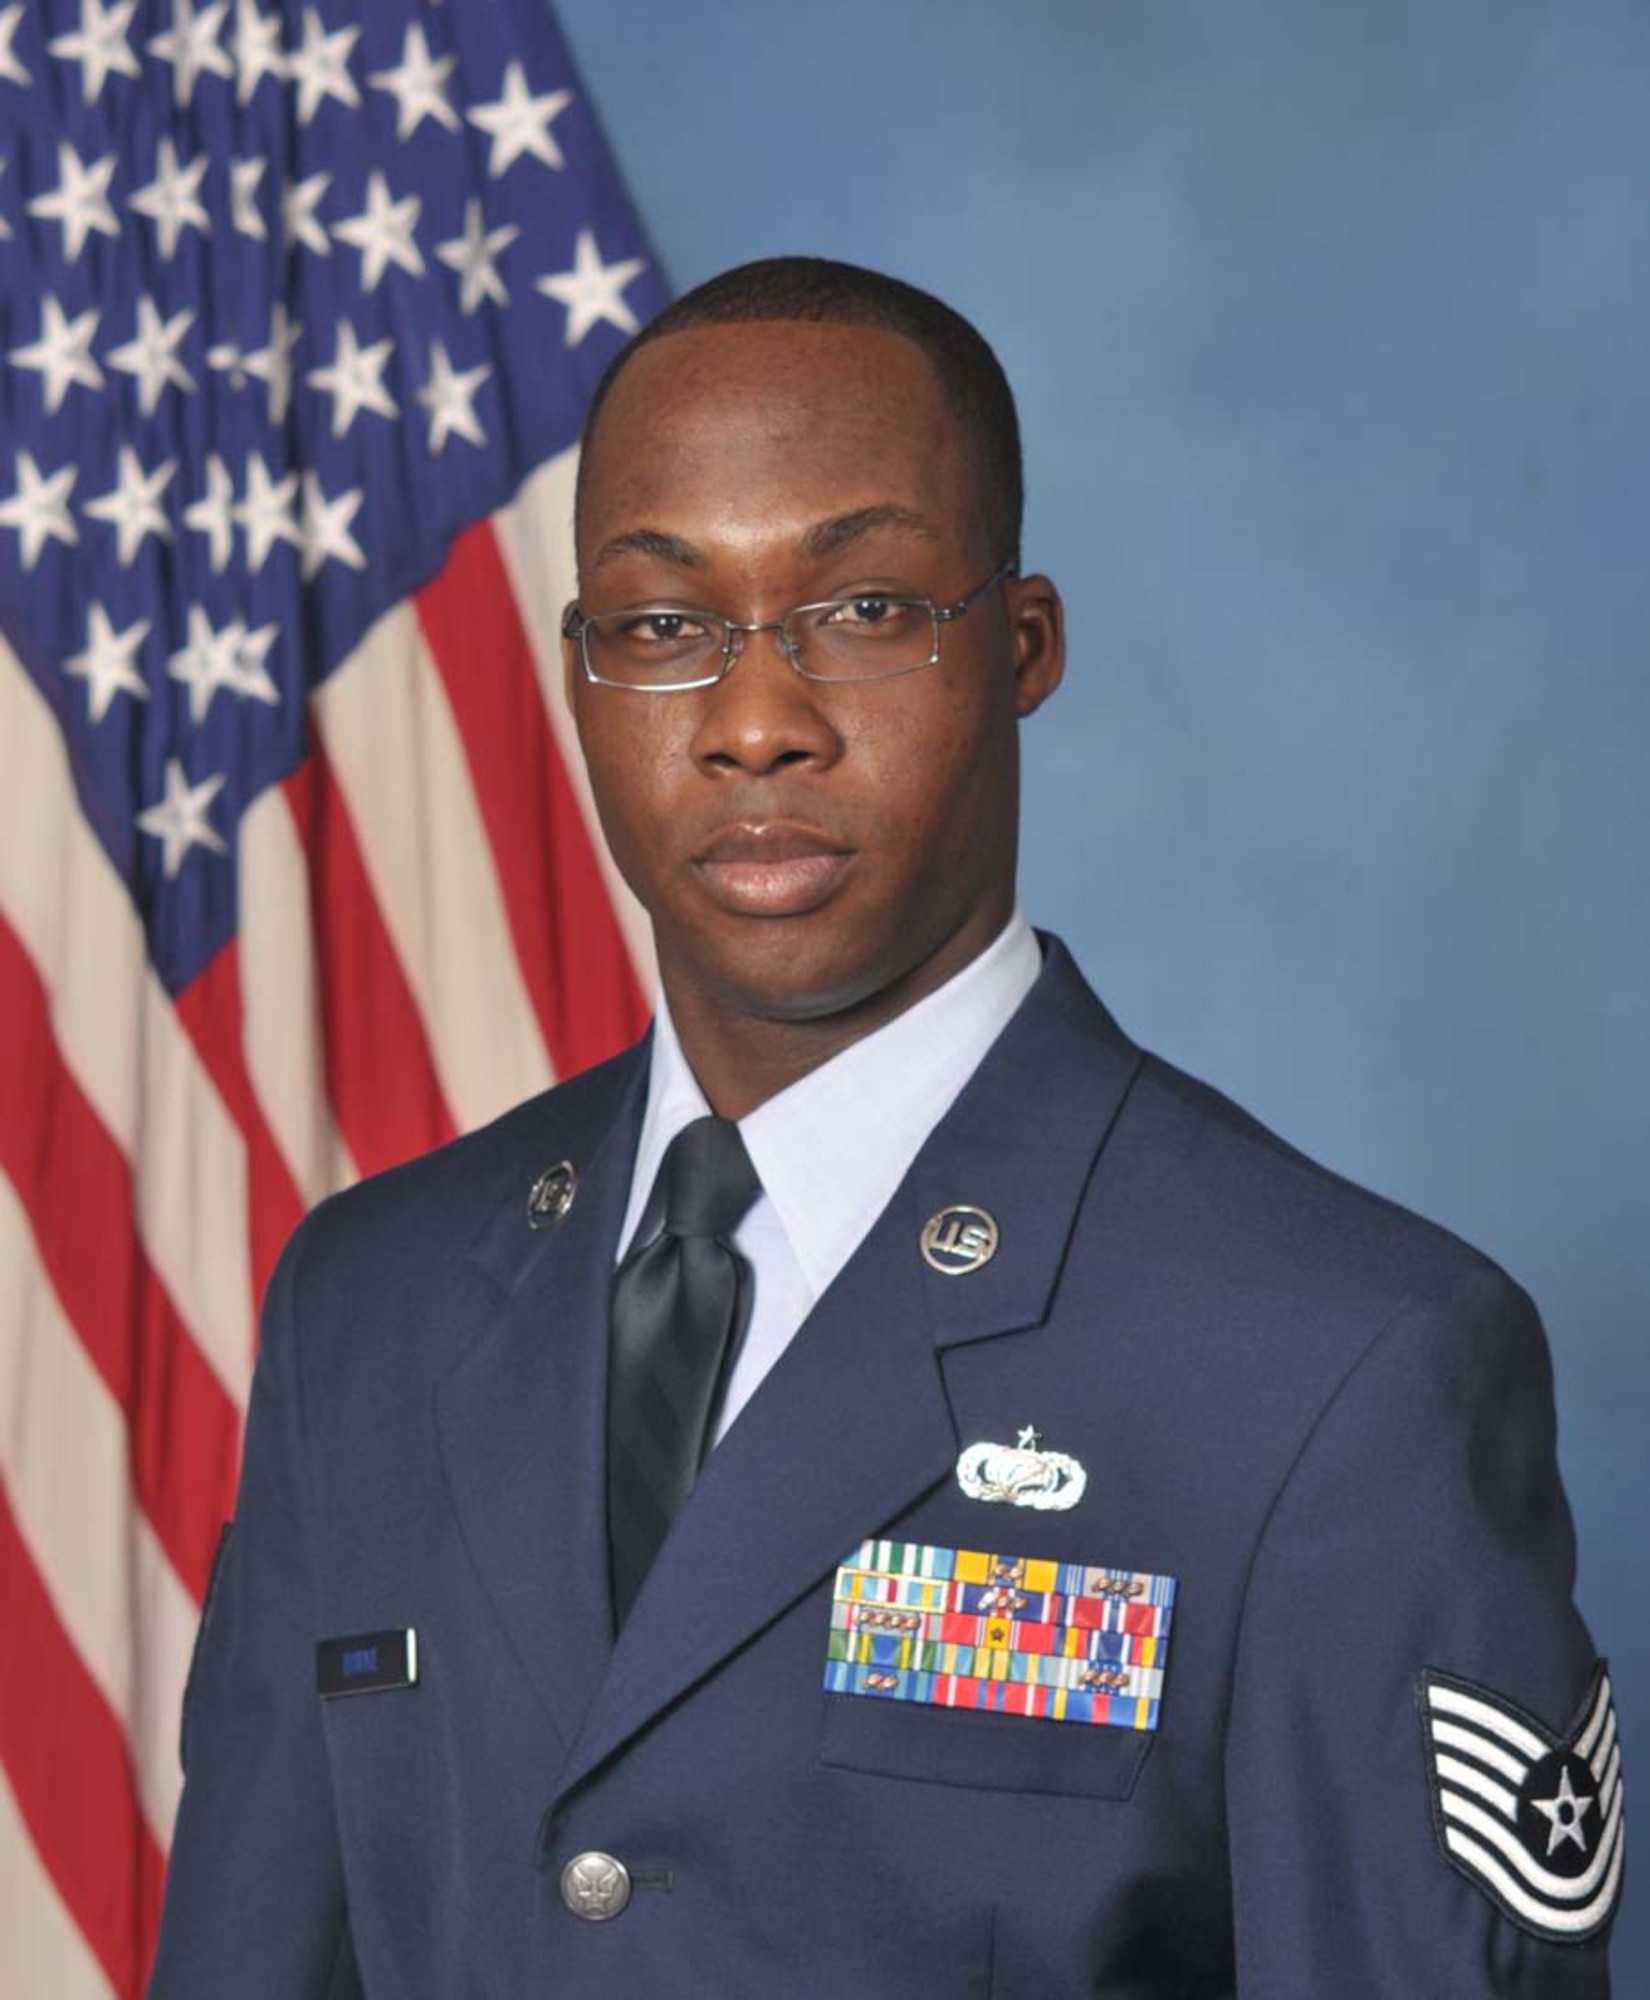 TSgt. Leroy Burke III from the Headquarters Air Force Operational Test and Evaluation Center's Commanders Action Group at Kirtland AFB, N.M., is the 2009 AFOTEC Noncommissioned Officer of the Year.